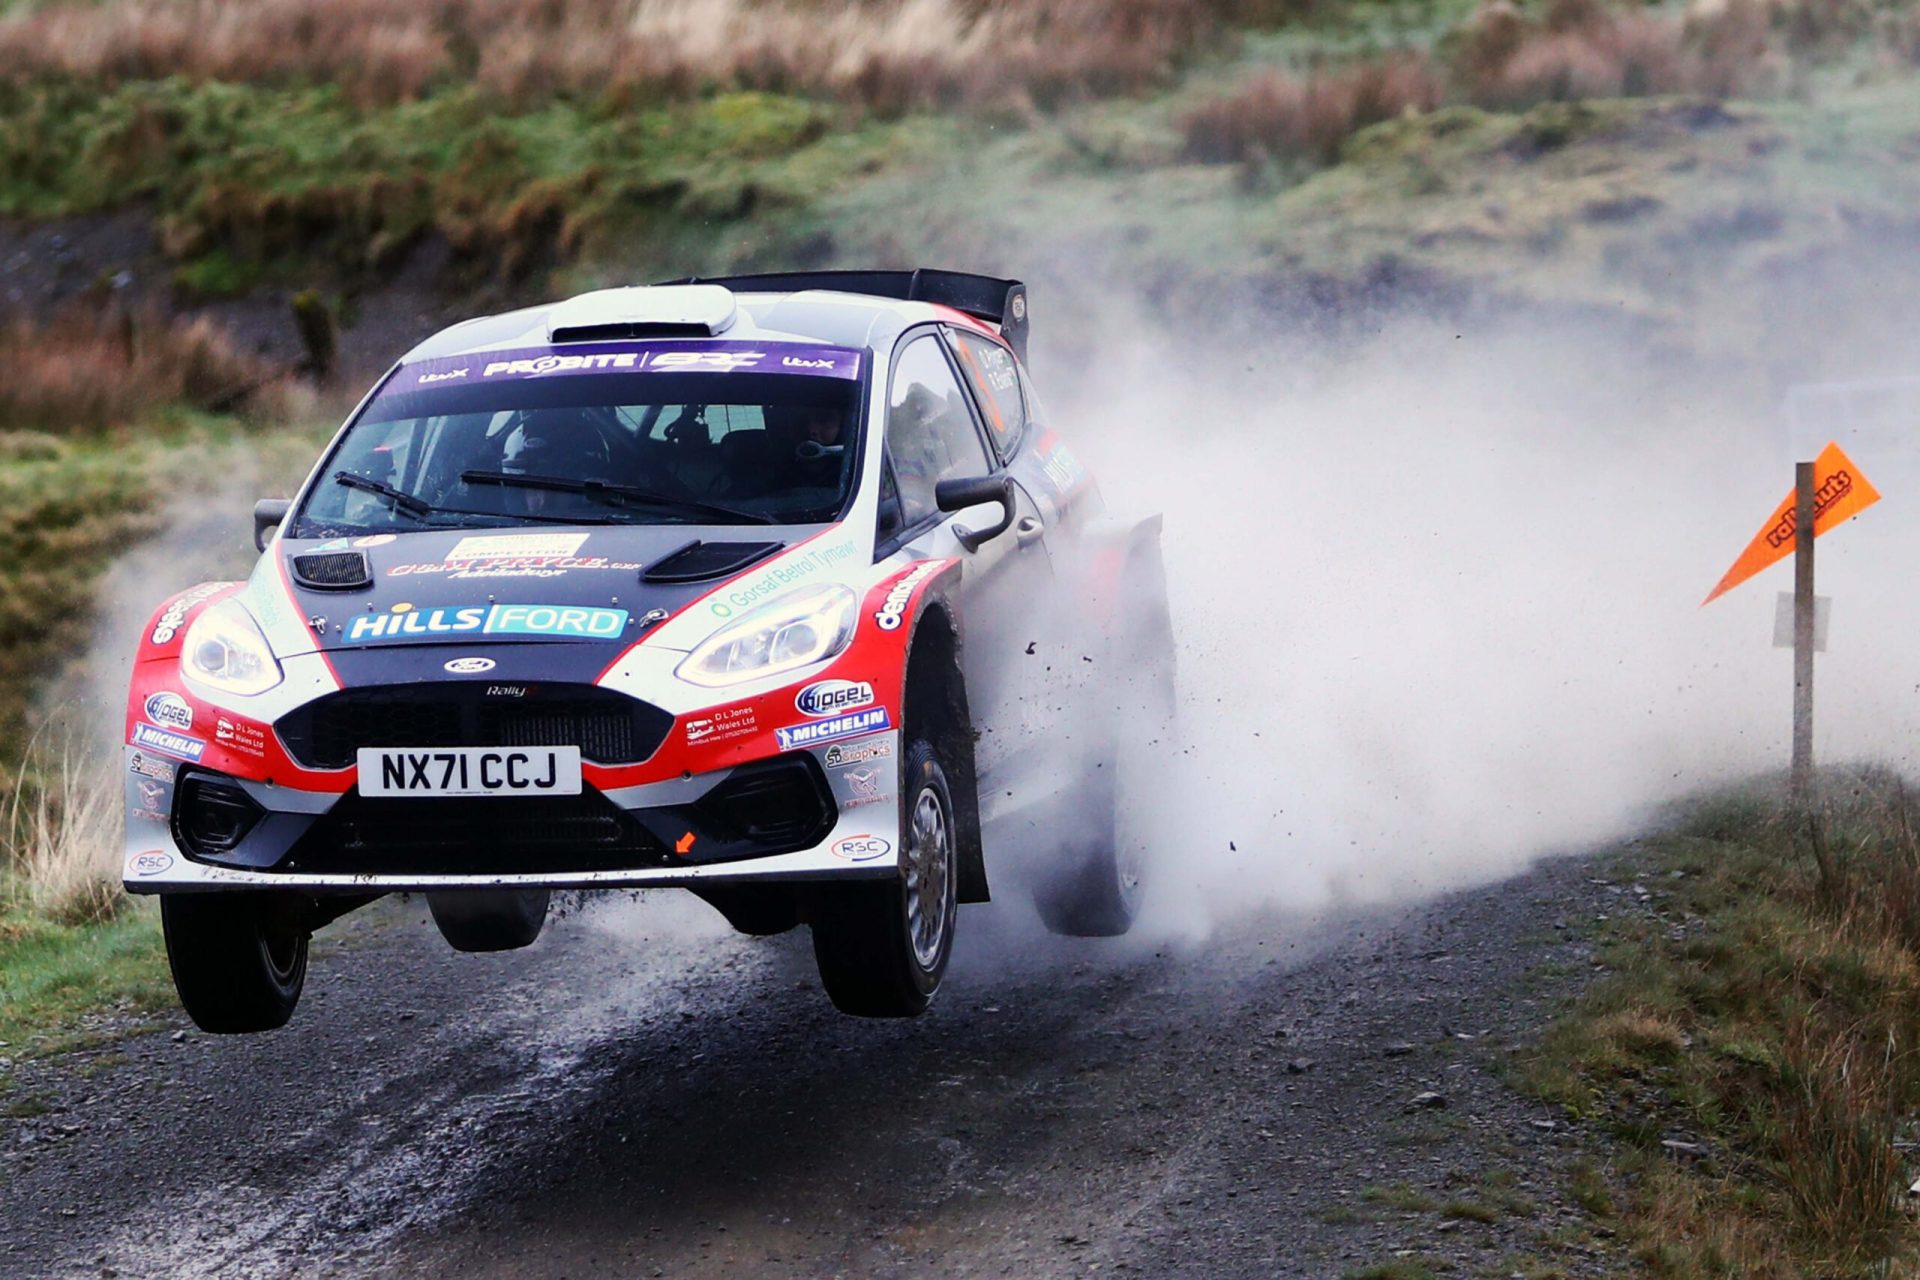 Pryce Dominates the Severn Valley Rally with Precision and Power